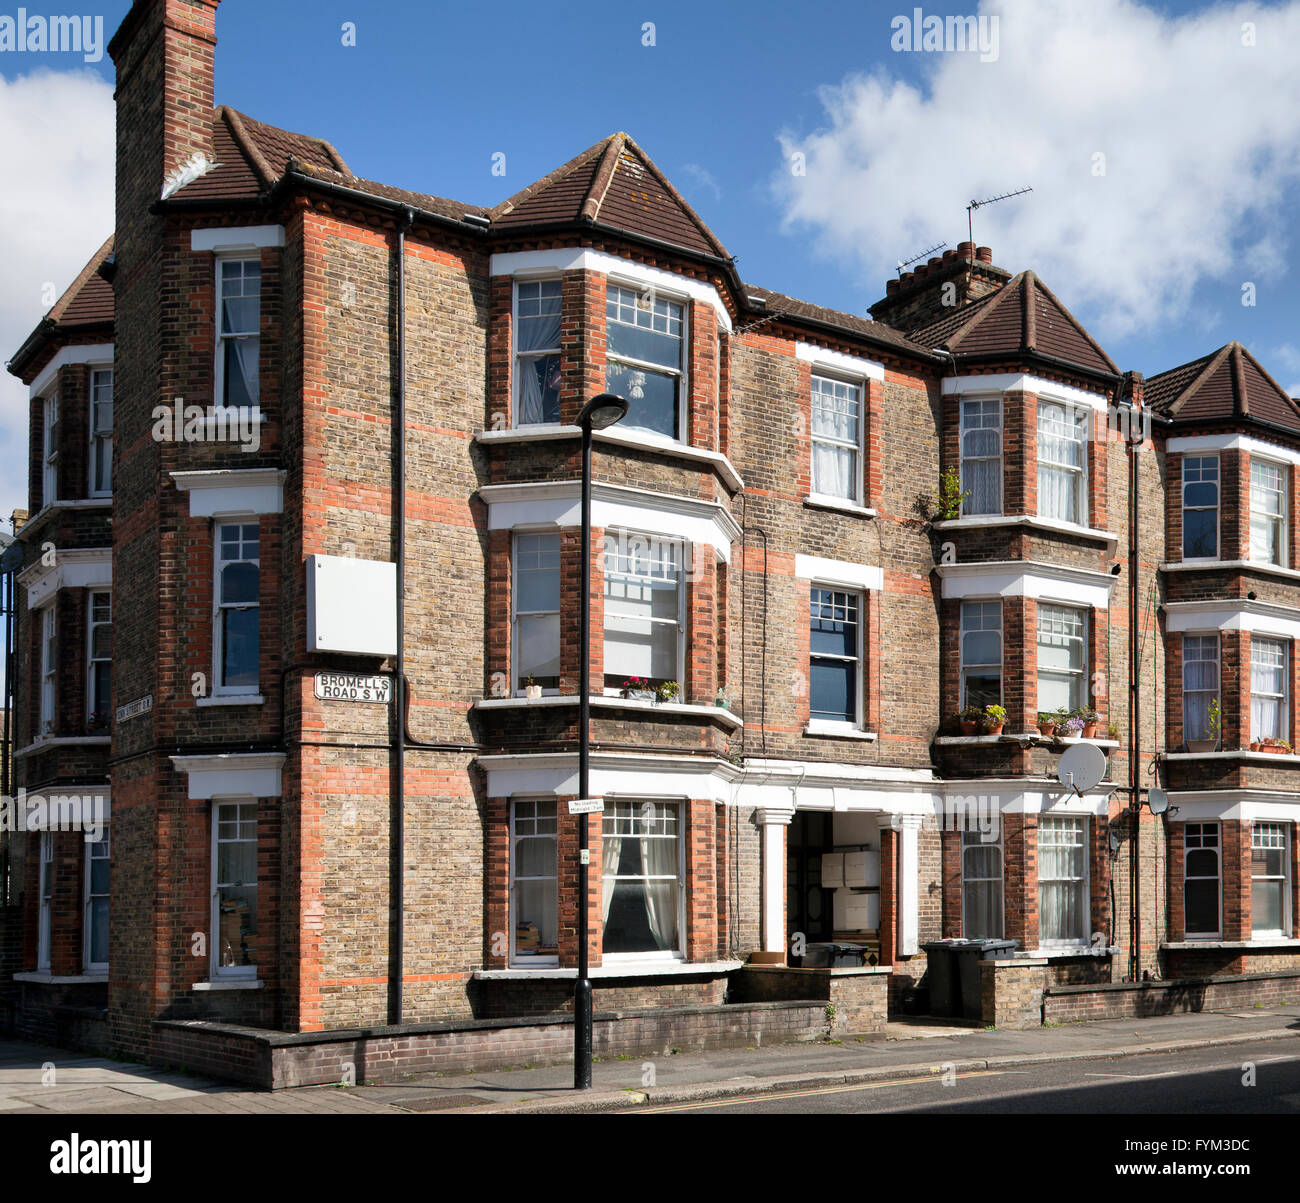 Property on Venn and Bromells Rd in Clapham  -  London UK Stock Photo